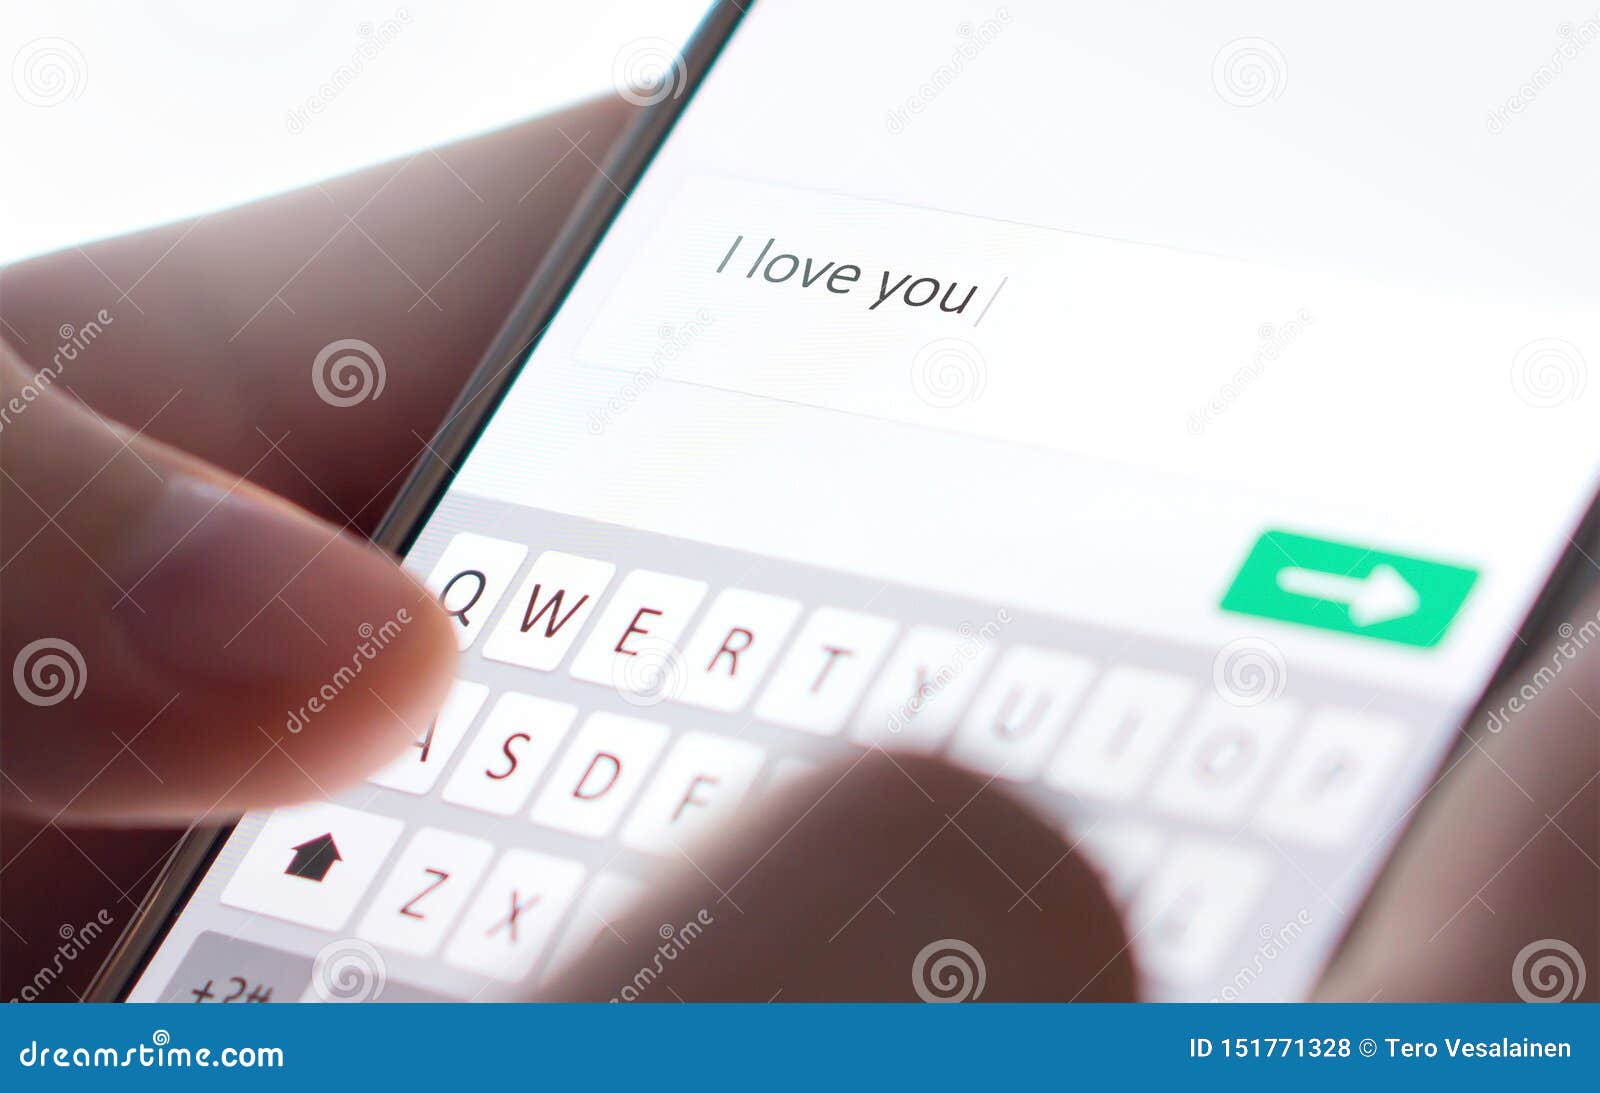 sending i love you text message with mobile phone. online dating, texting or catfishing concept. romance fraud, scam.